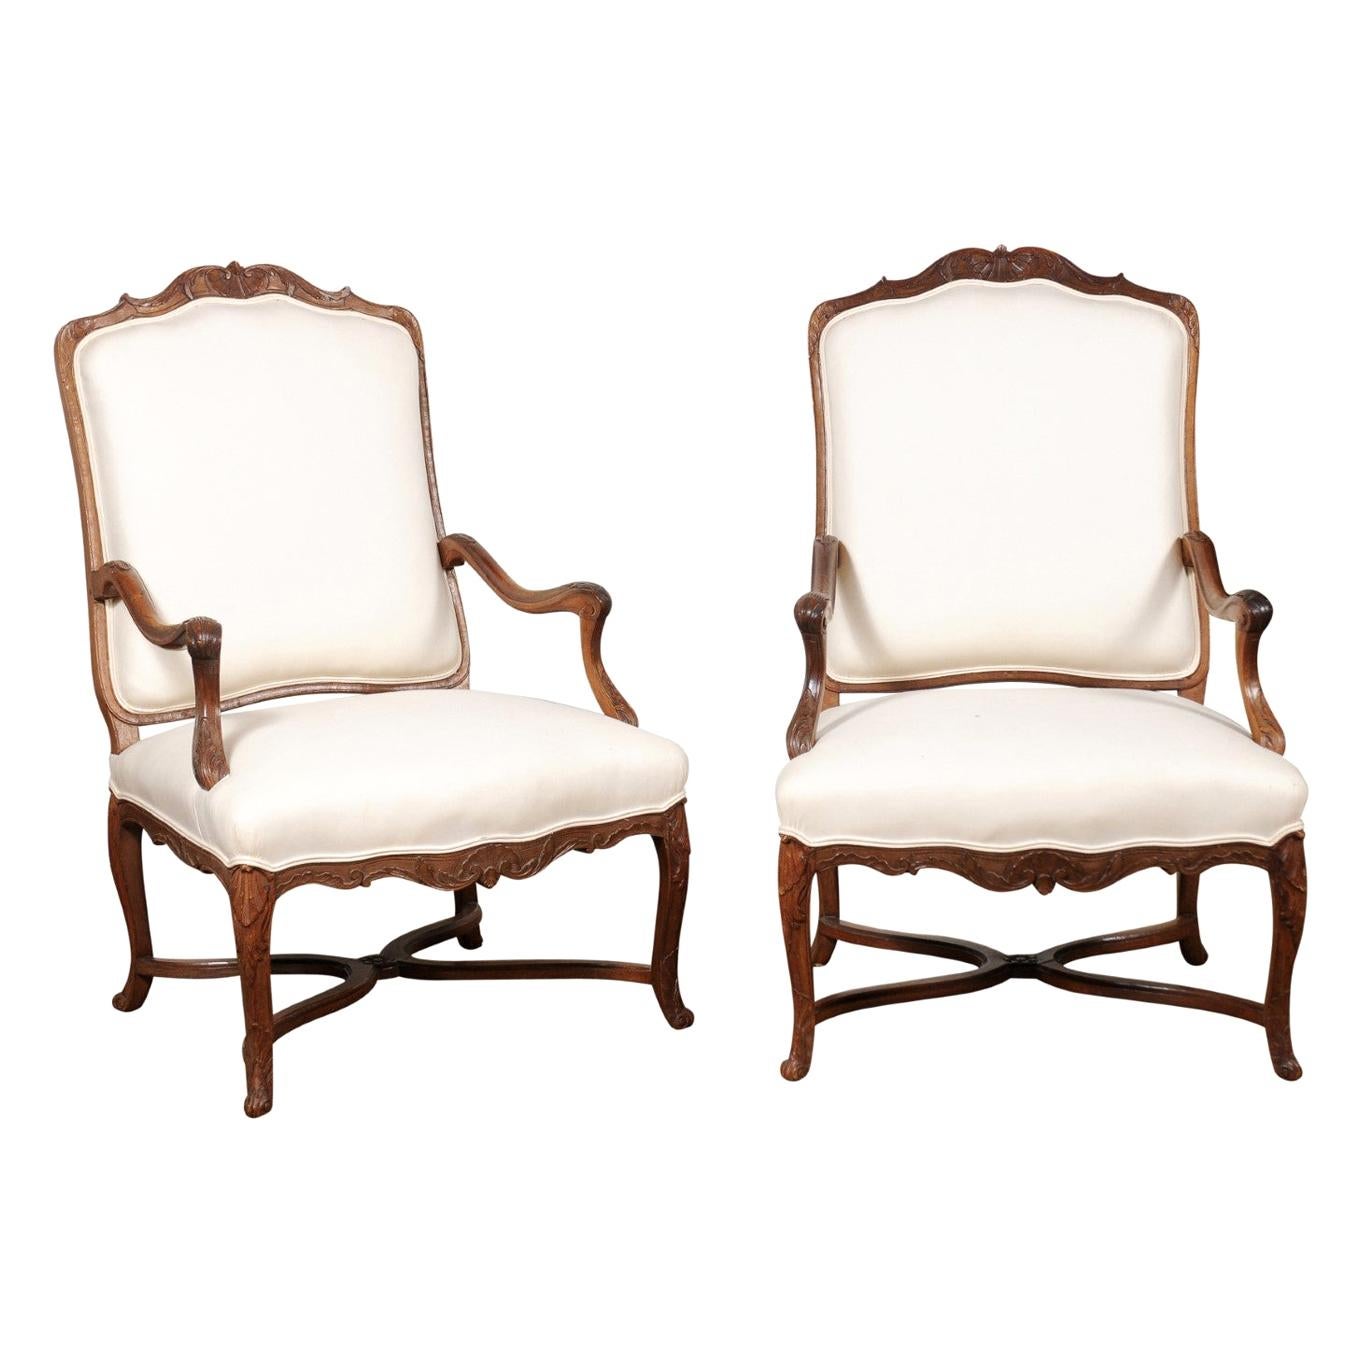 Pair of Early 18th Century French Régence Walnut Armchairs with New Upholstery